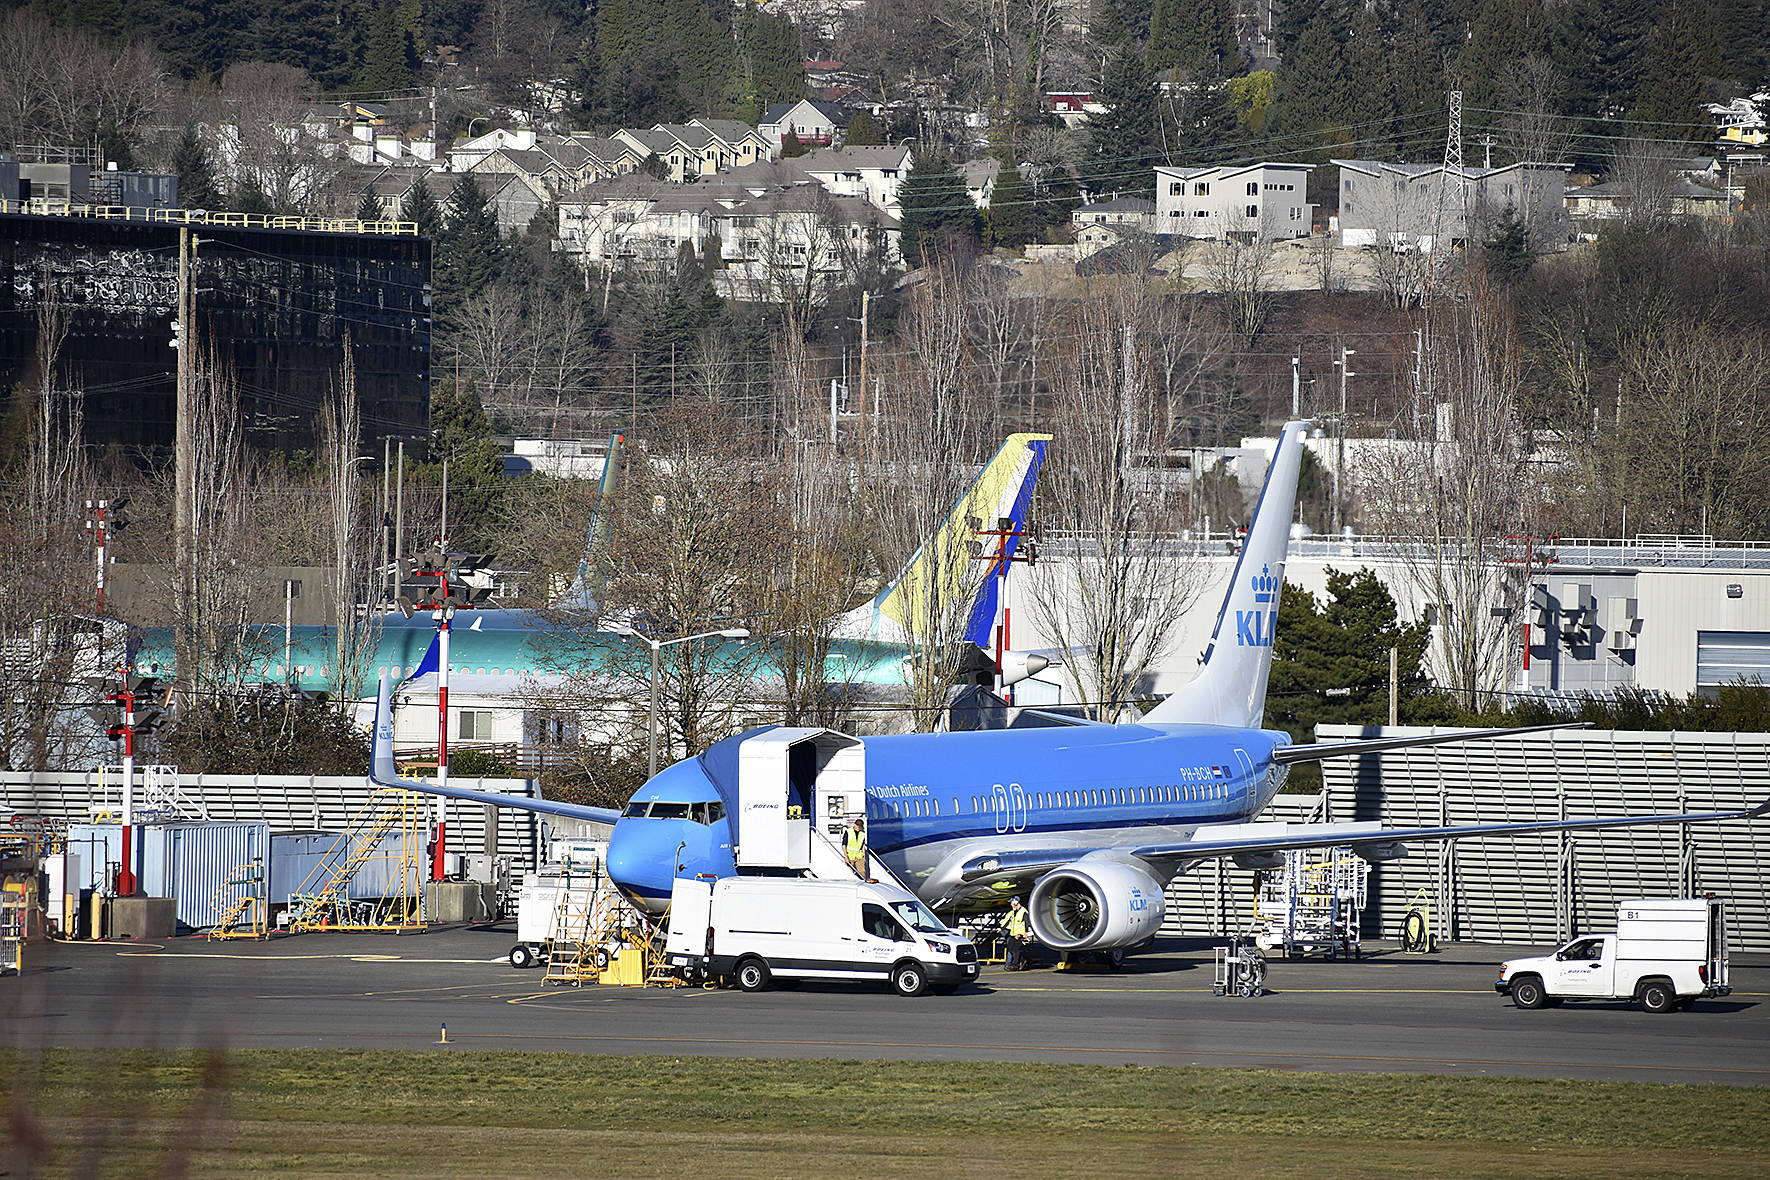 Boeing says shutting down Renton 737 line is an “alternative” to prepare for